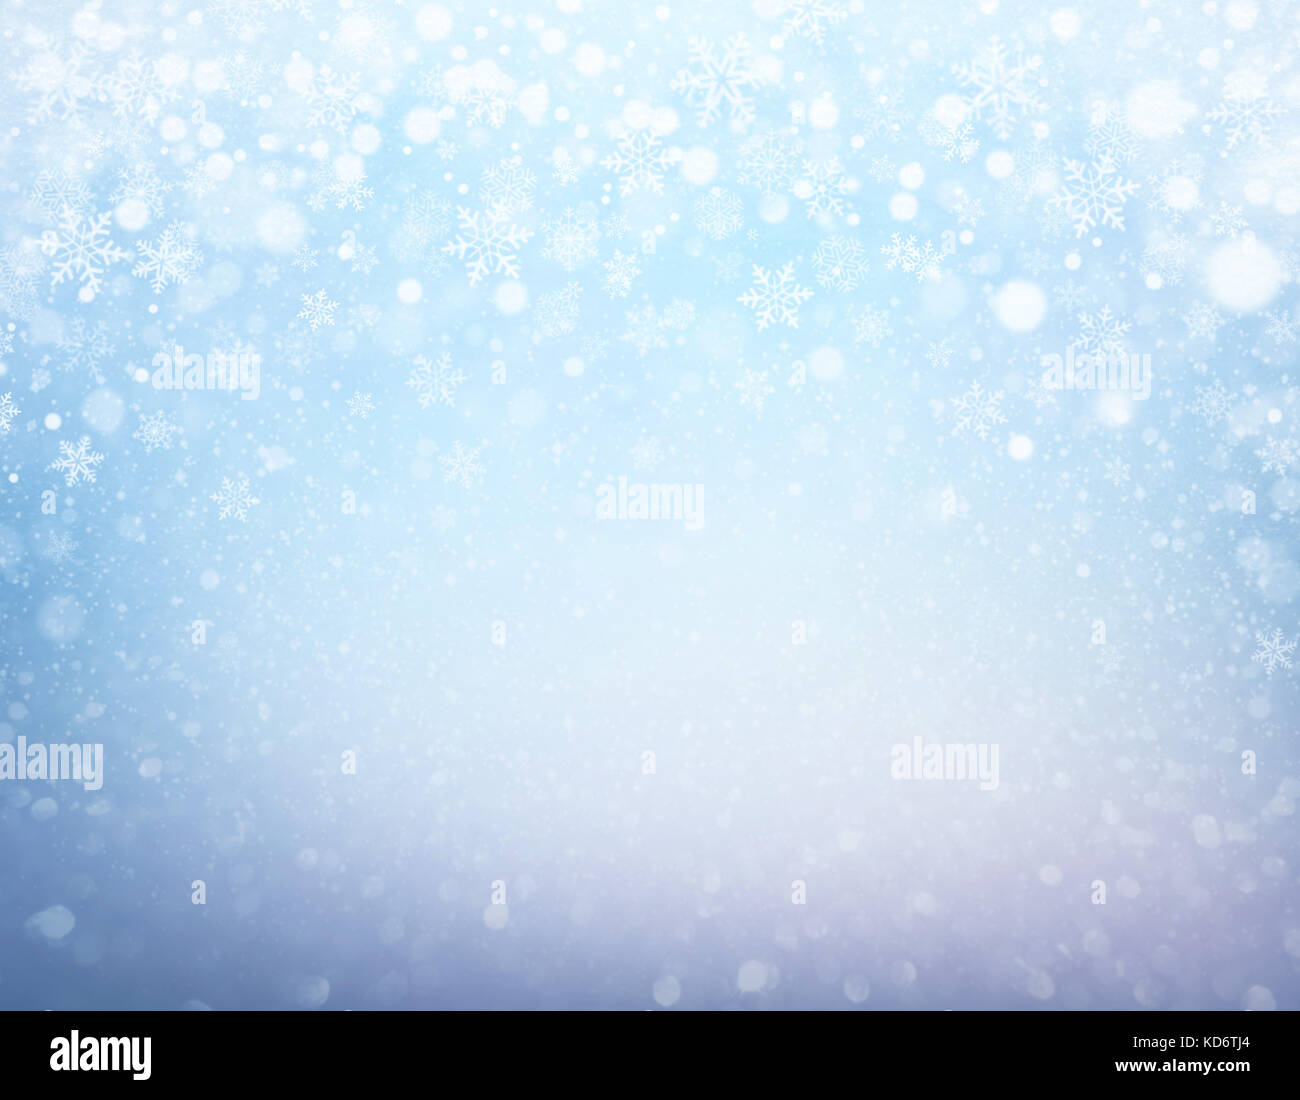 Snowflakes and snowfall on a frozen blue background - Winter material Stock Photo